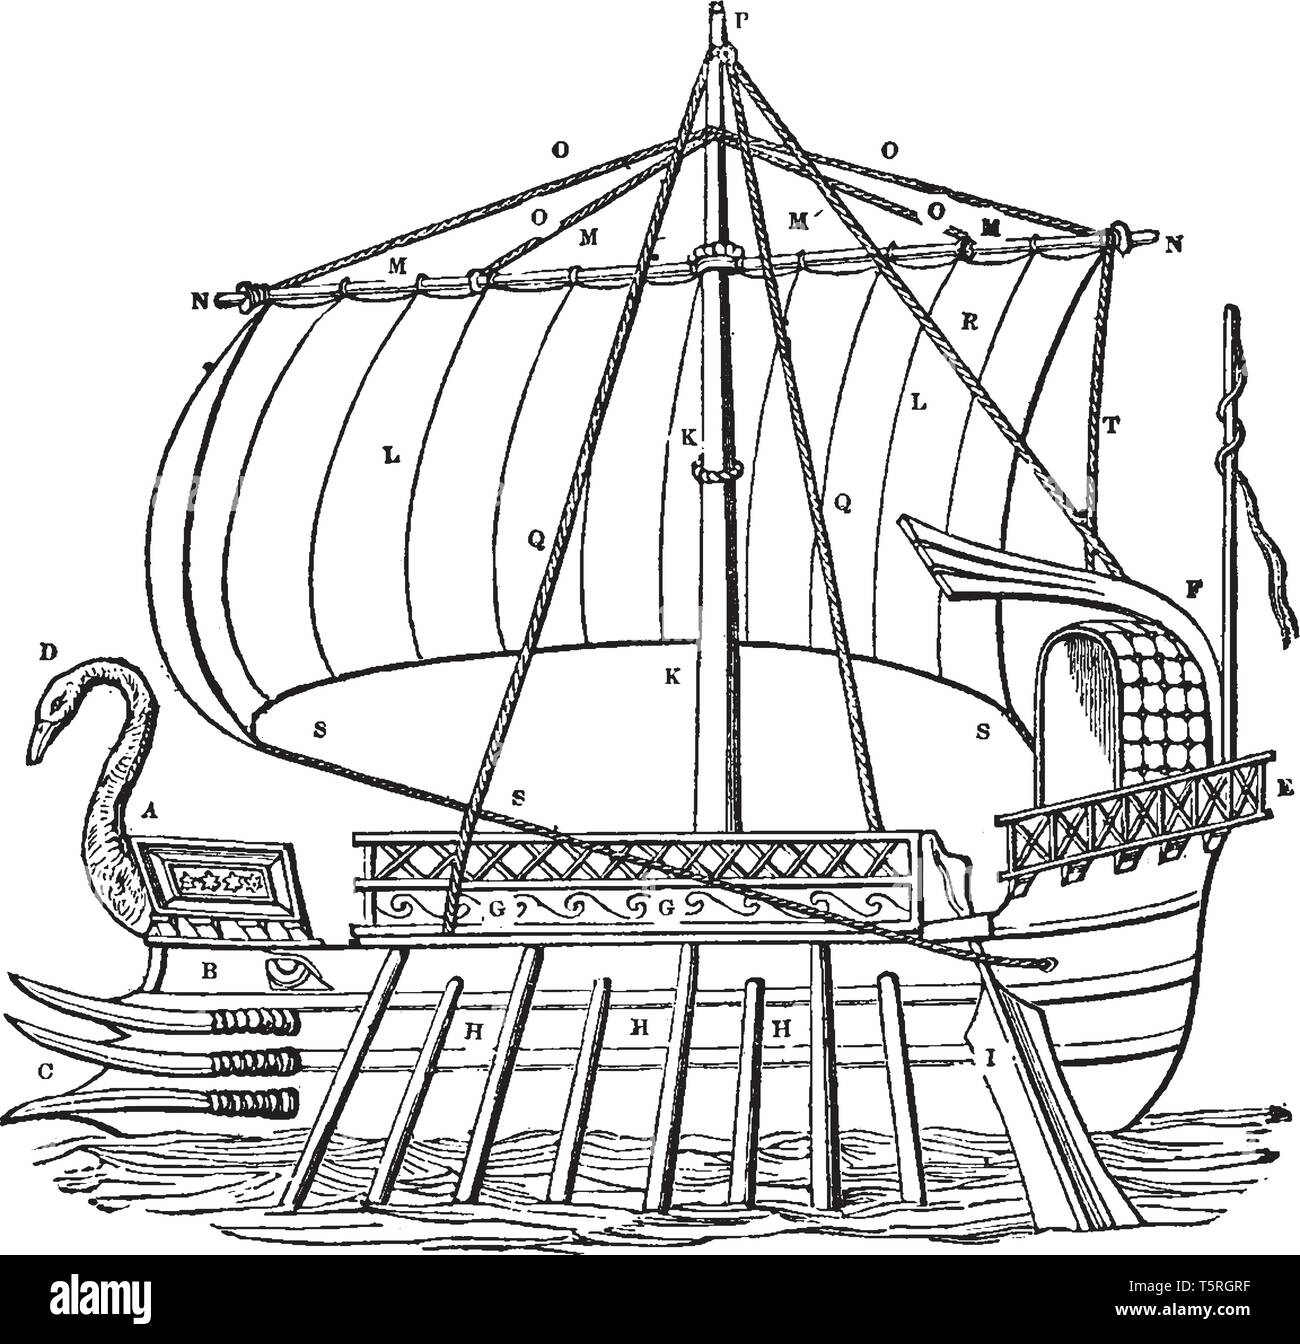 Navis which is a Greek ship, vintage line drawing or engraving illustration. Stock Vector